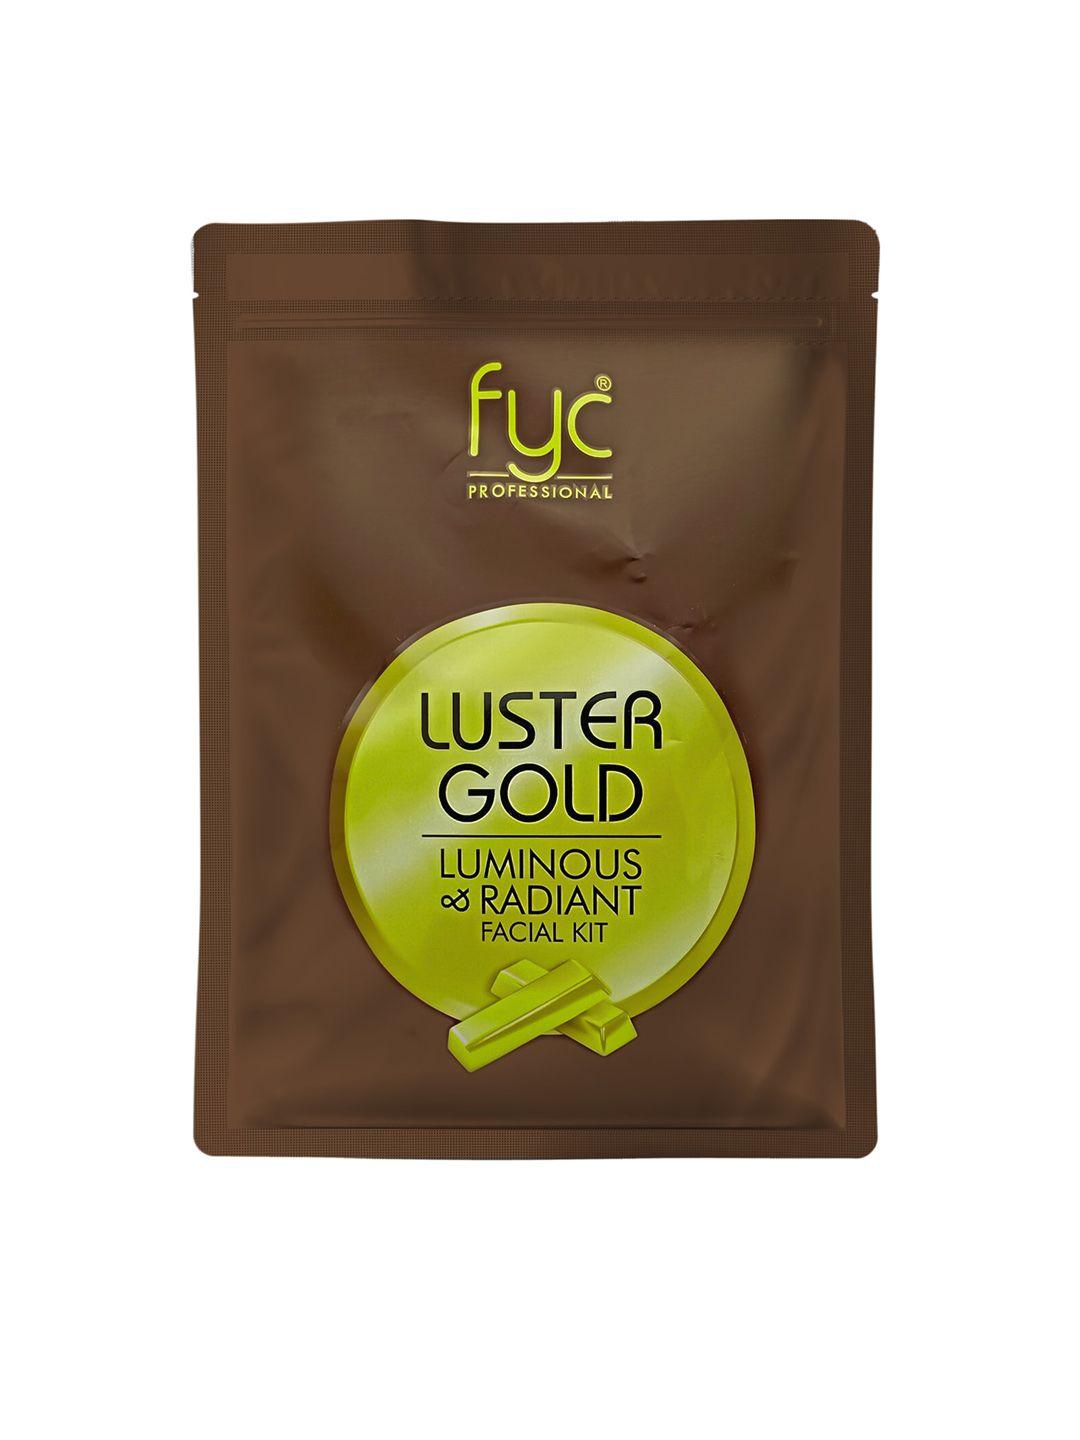 fyc professional luster gold facial kit-55gm